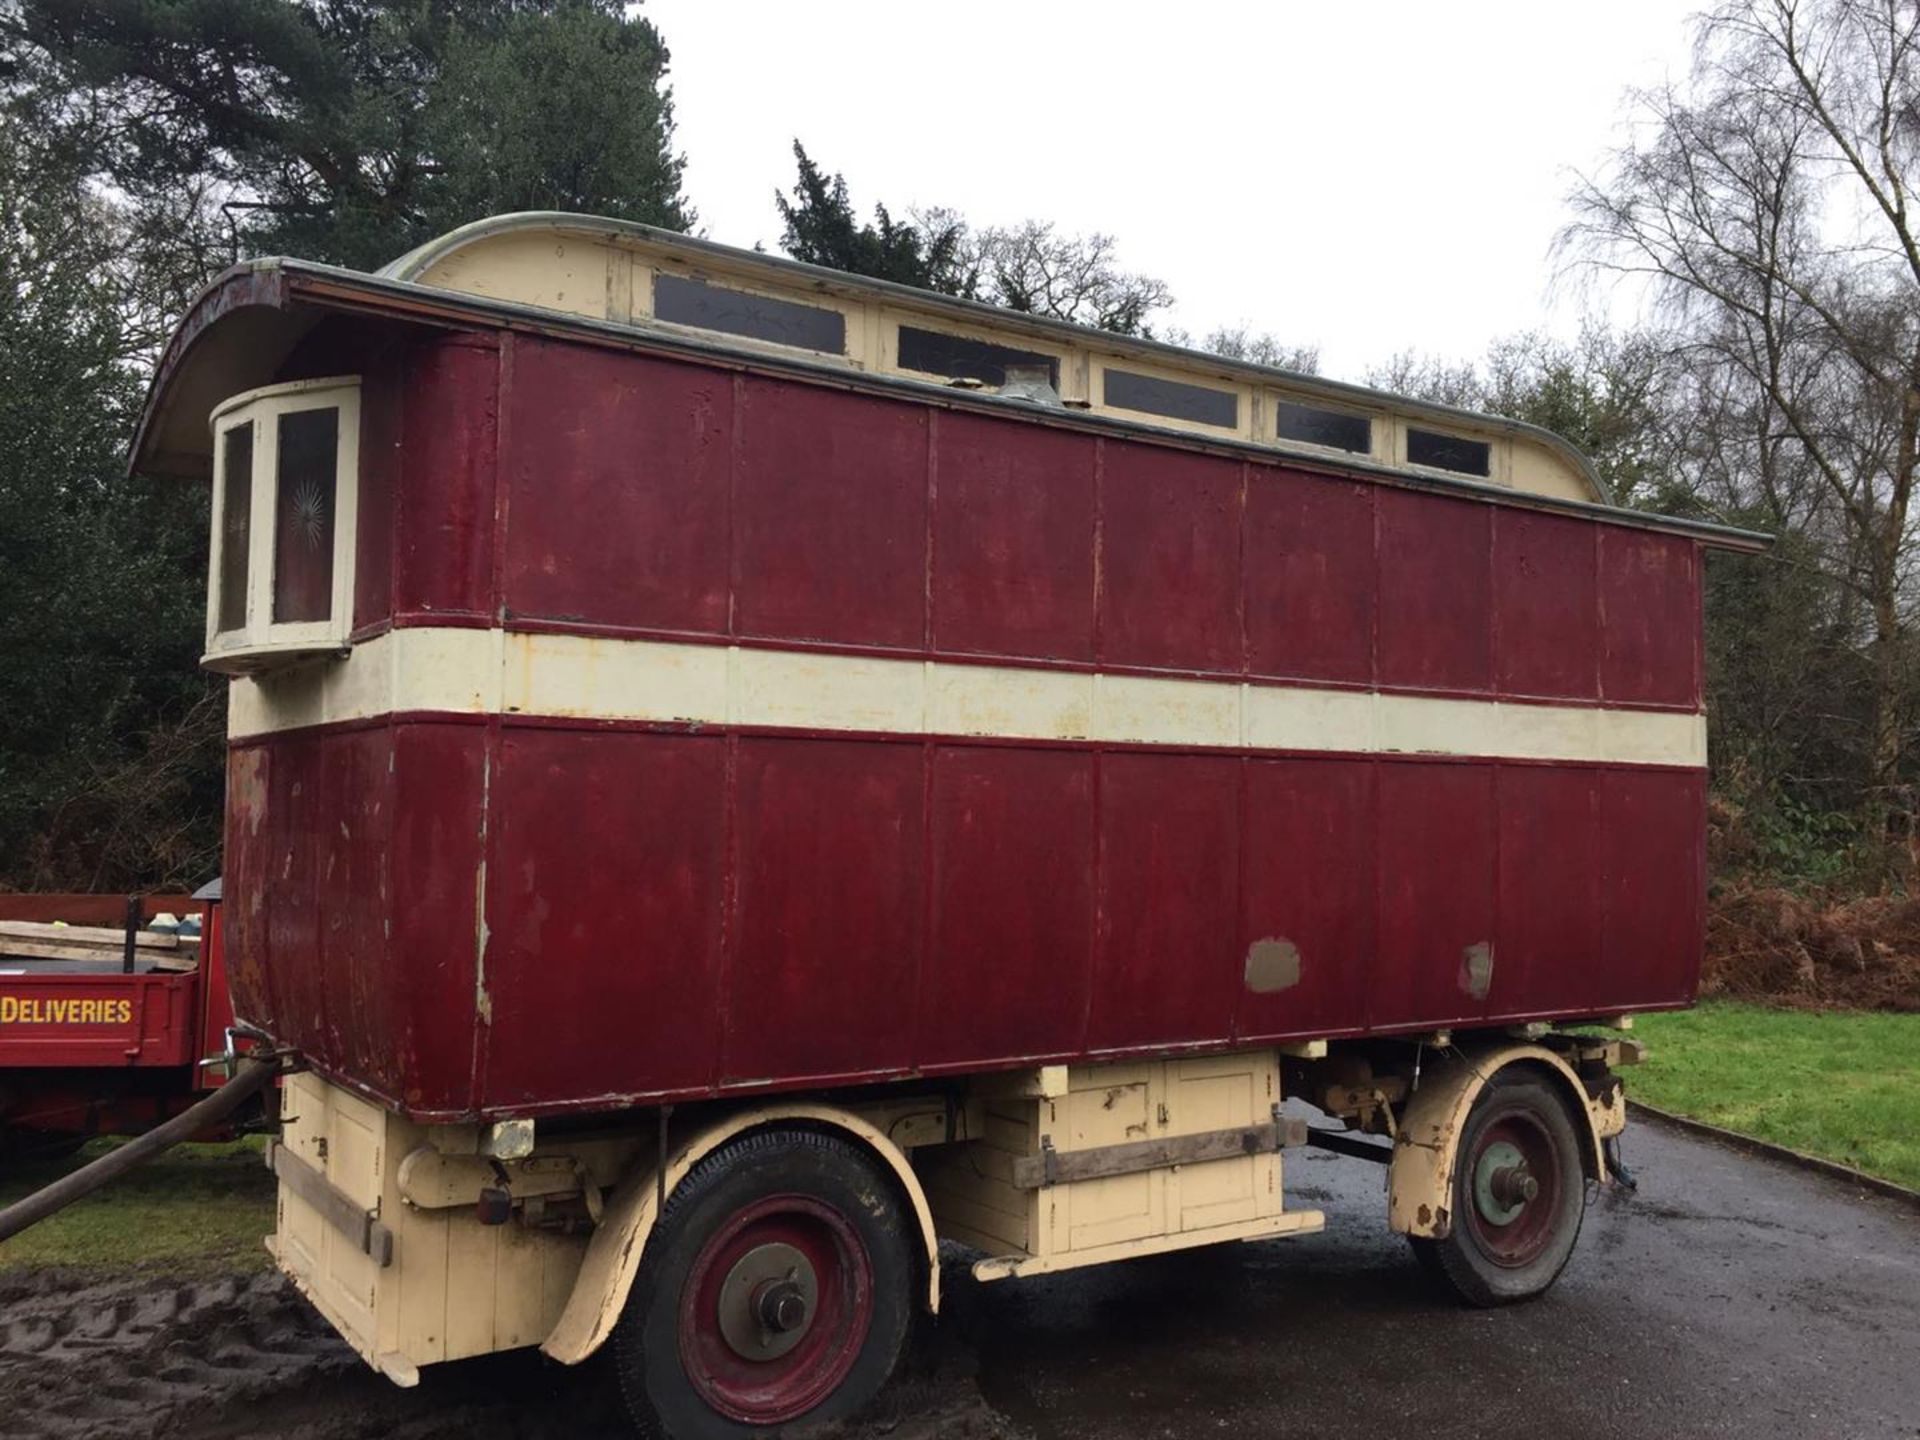 Aluminium clad timber frame living wagon understood to have been built in 1934 by Thomas's of - Image 3 of 10